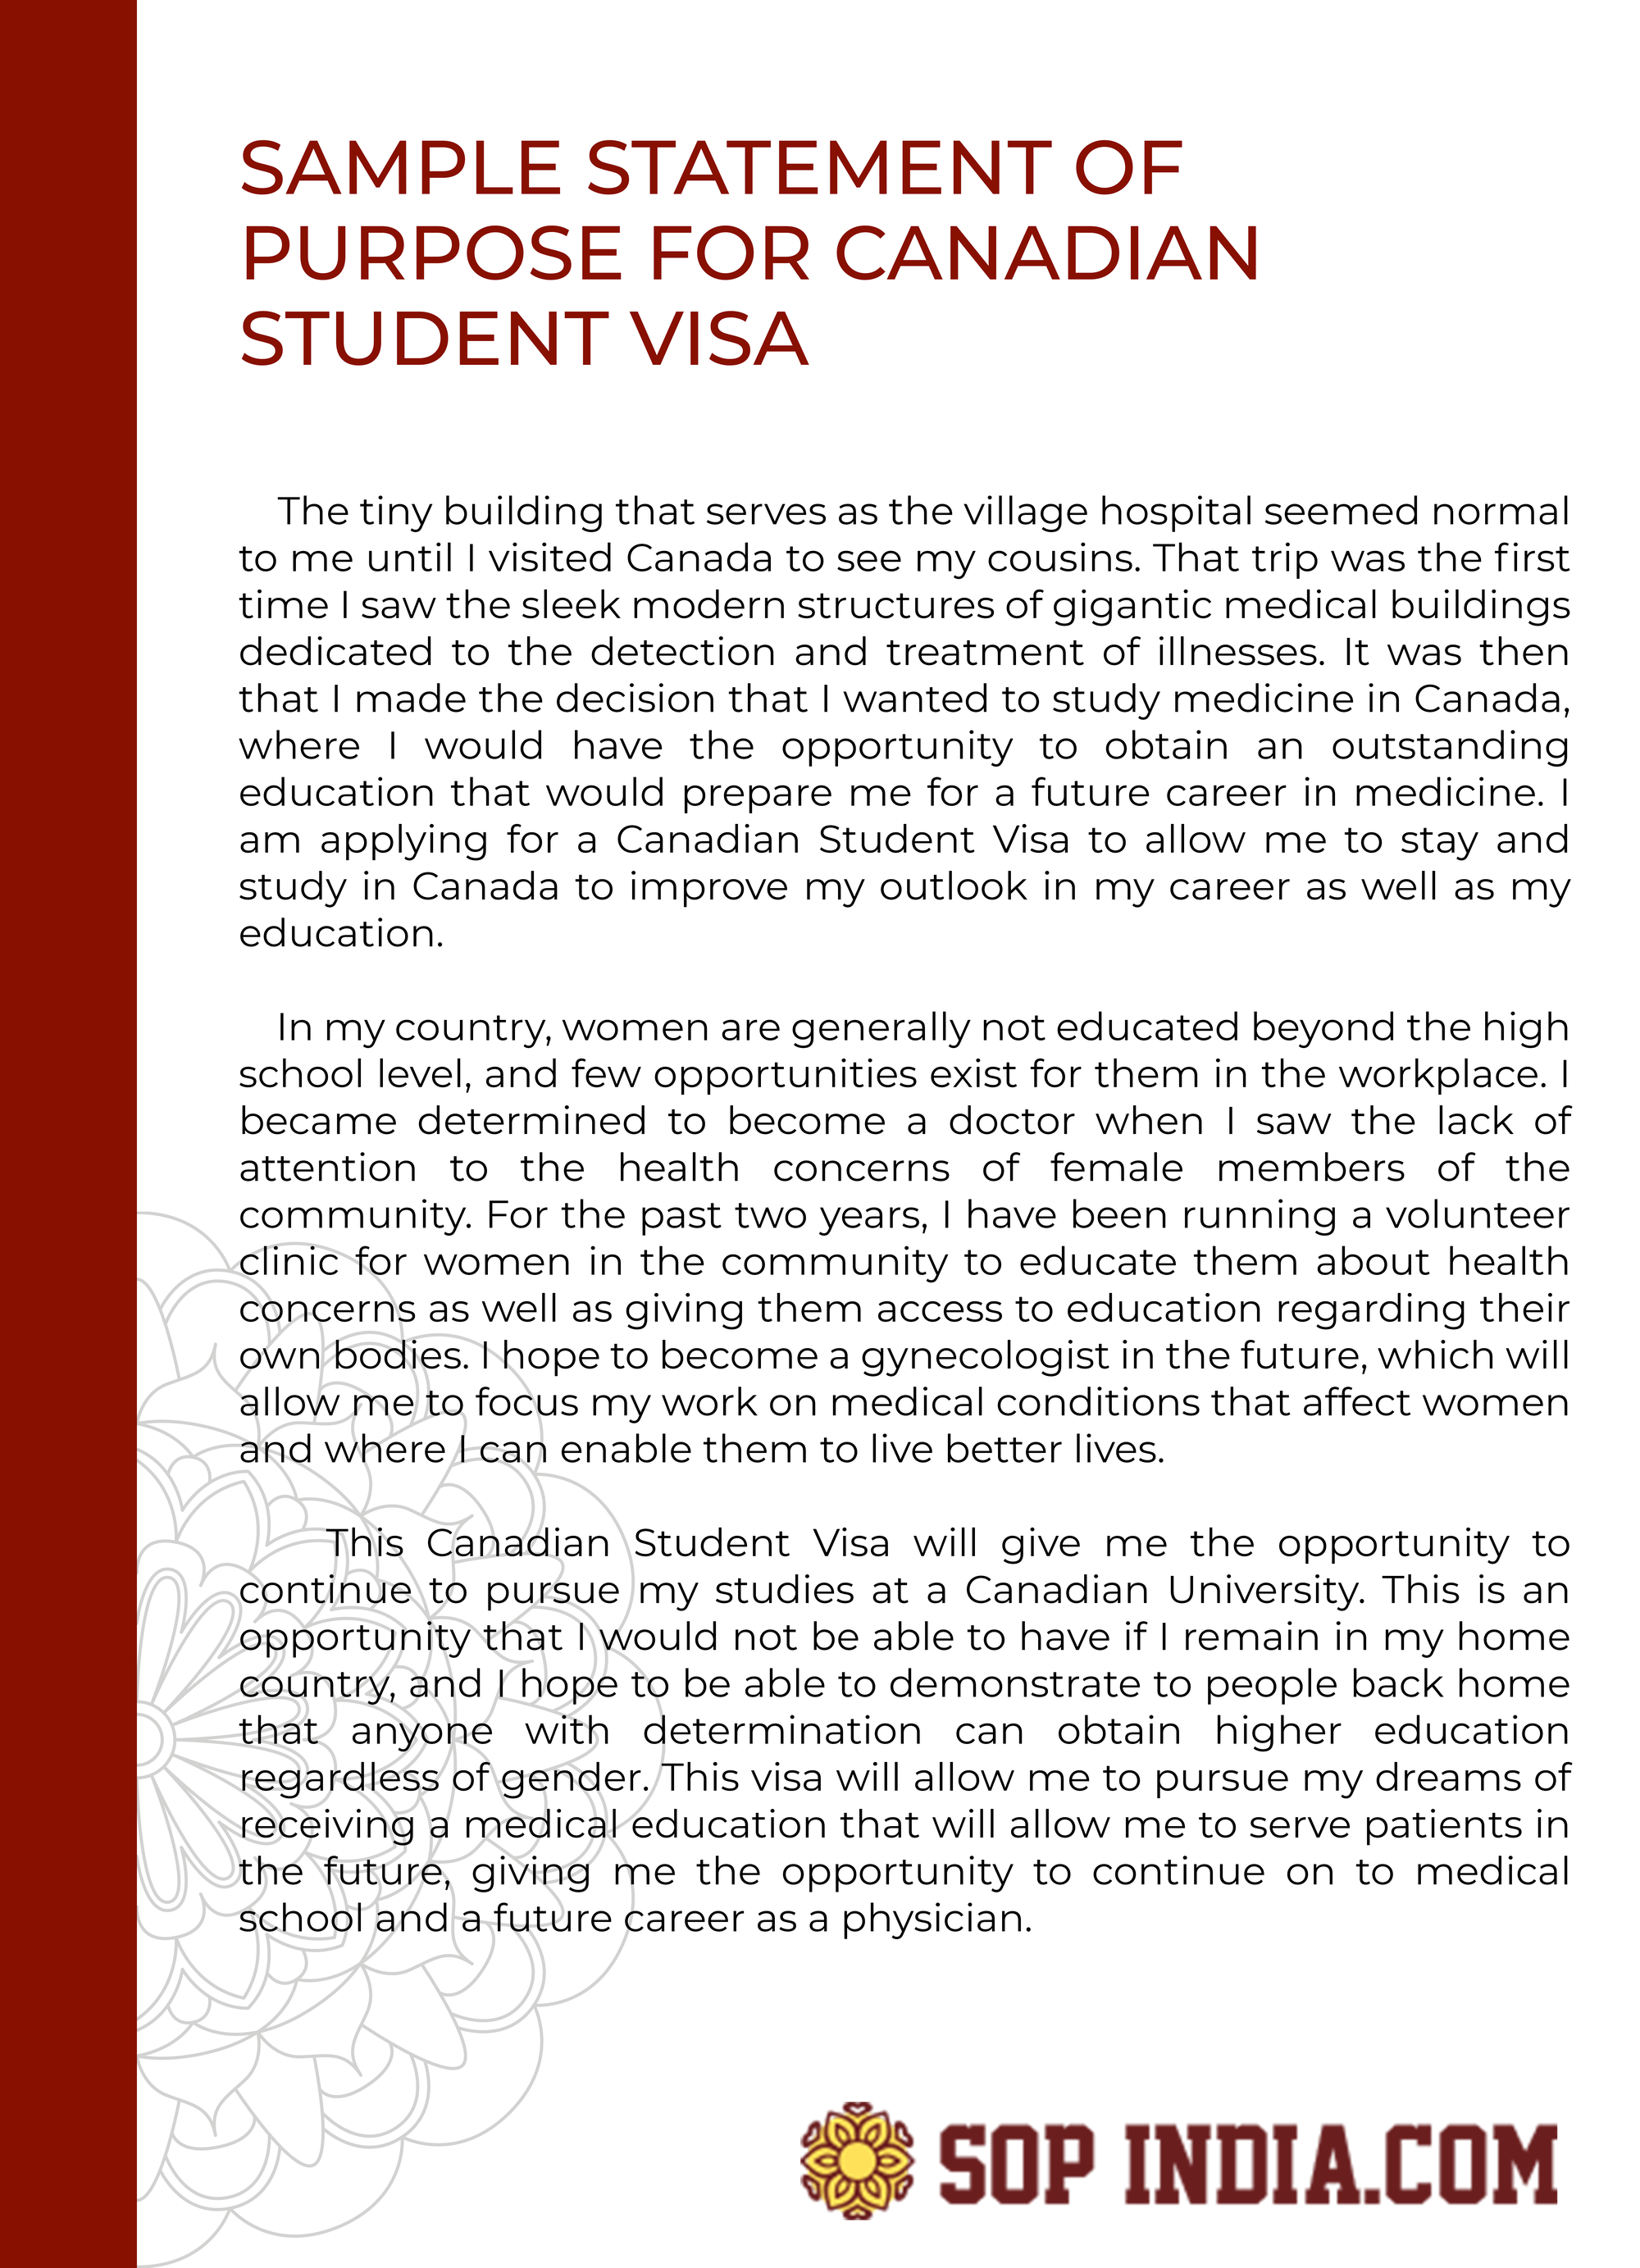 How to Write a SOP for a Canadian Student Visa